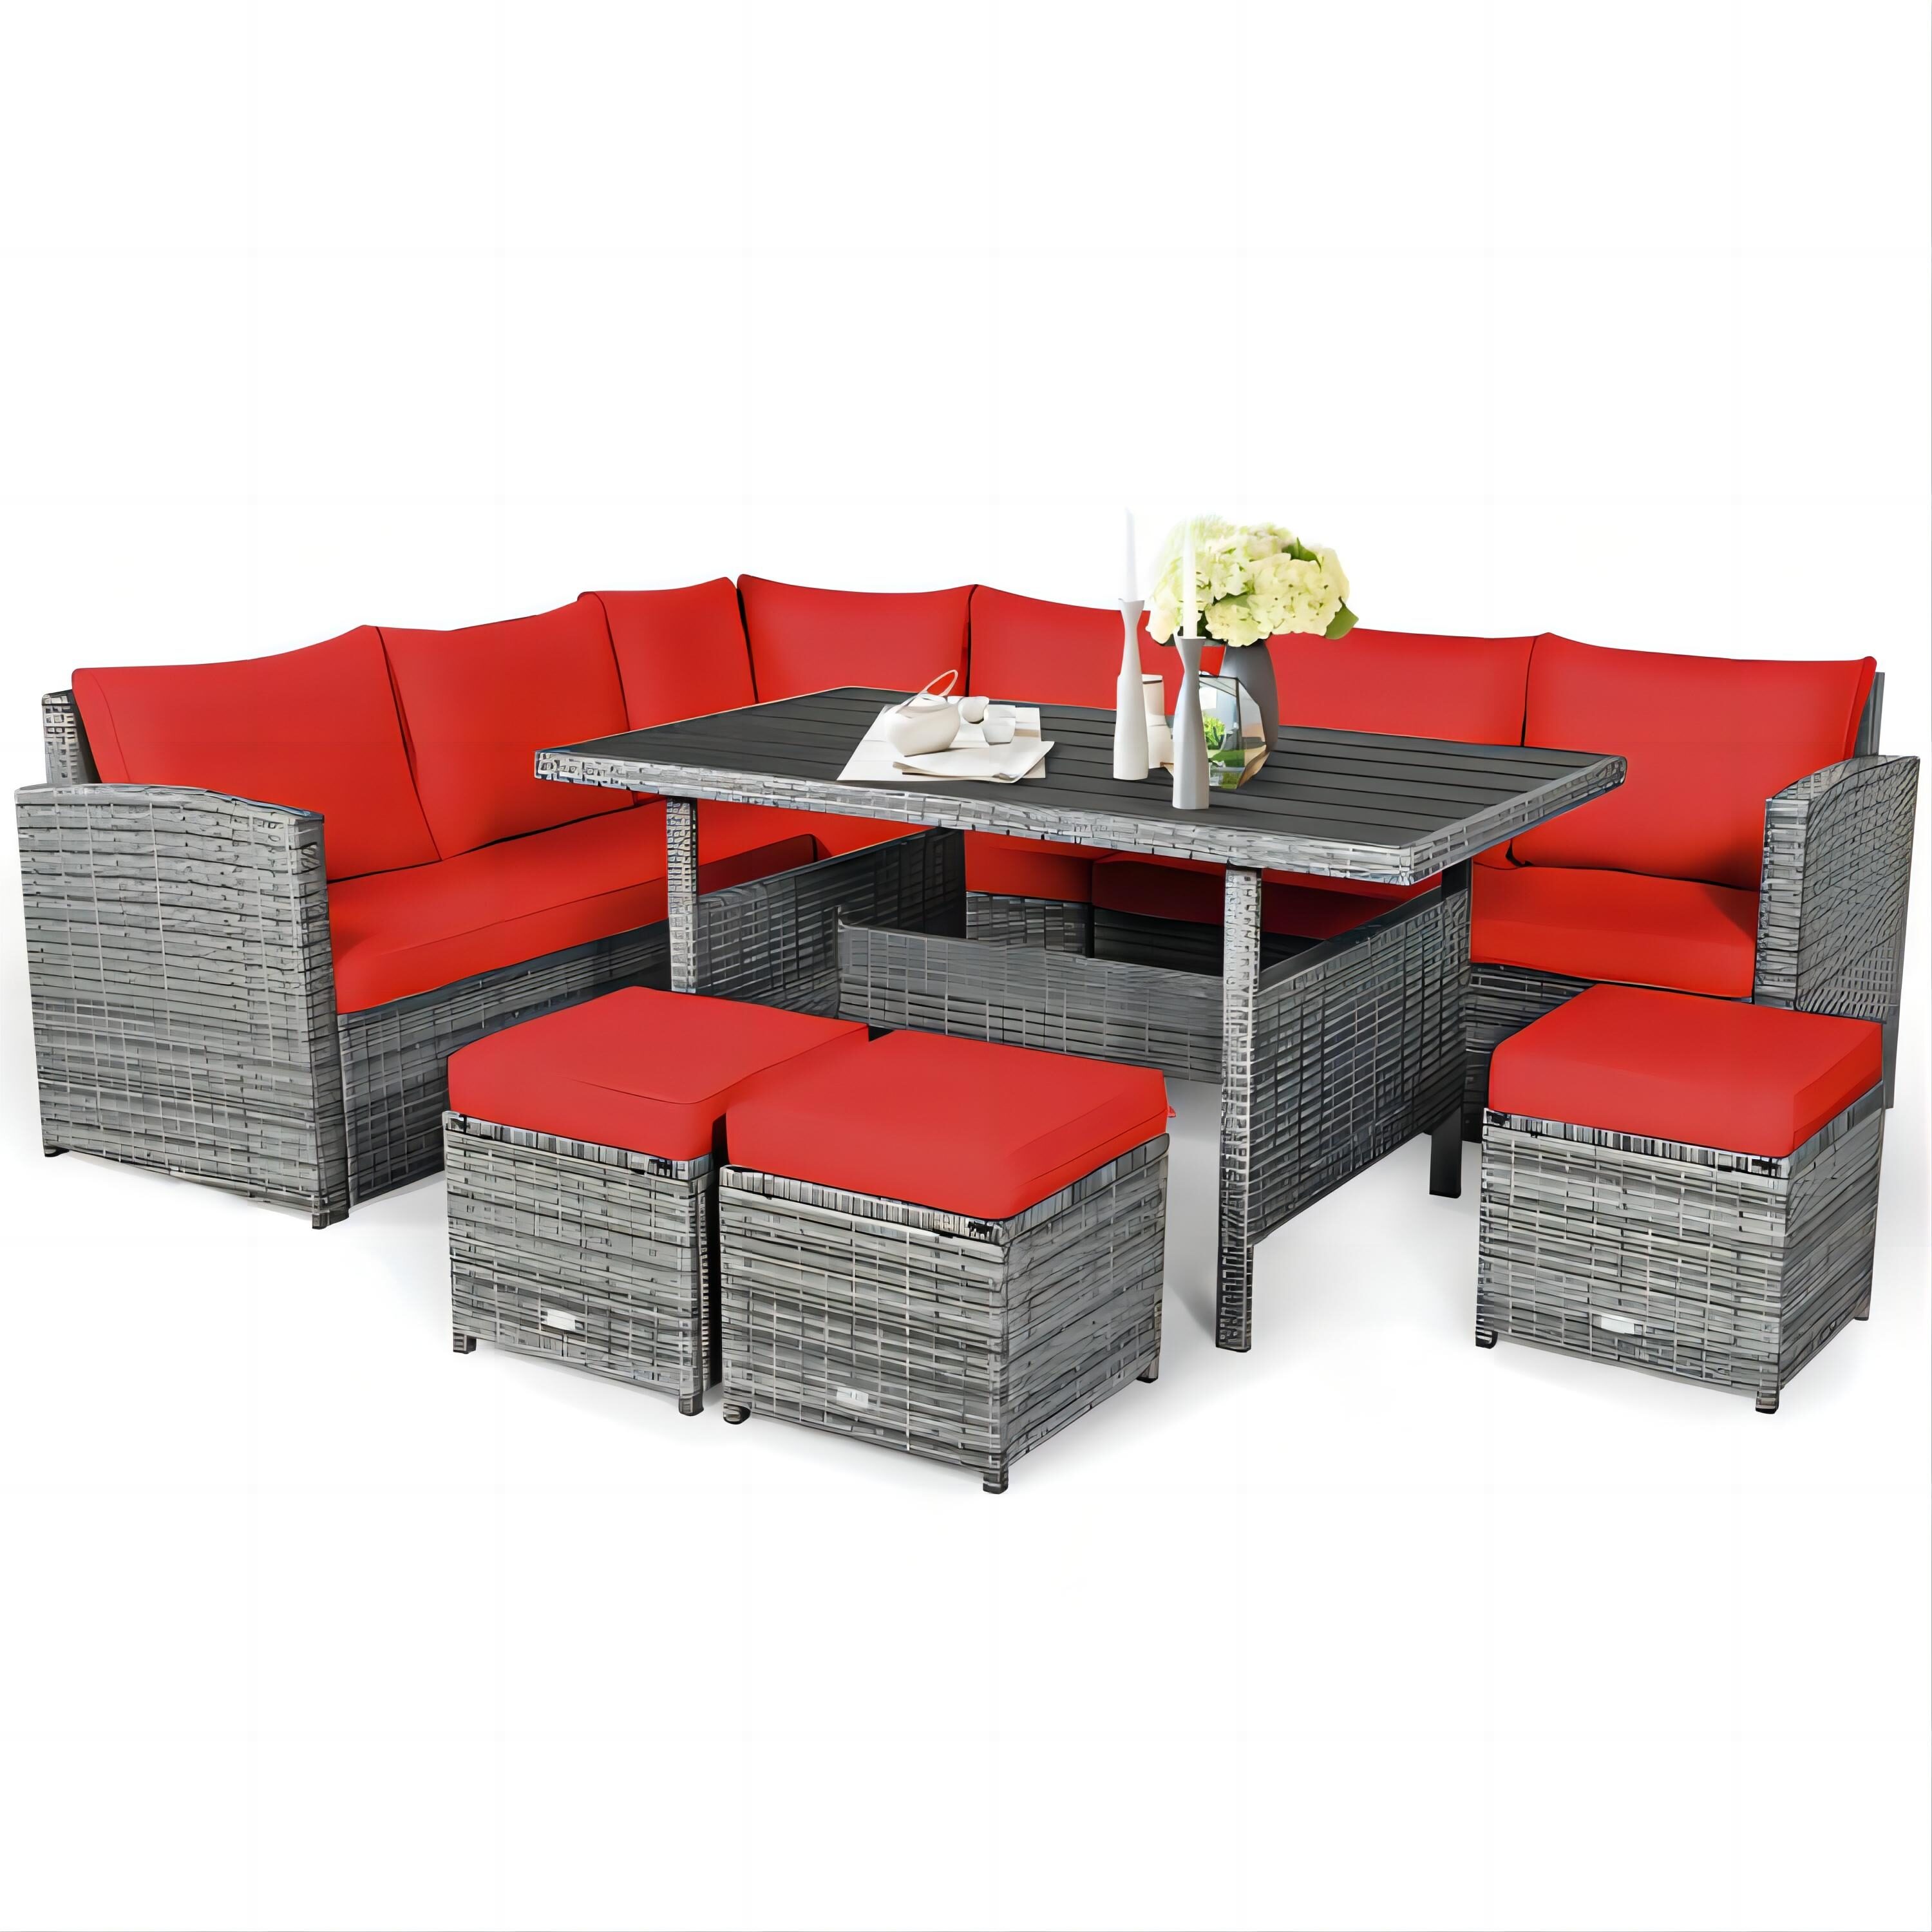 7 Pieces Patio Rattan Red Dining Furniture Sectional Sofa Set with Wicker Ottoman | - Forclover HYFAS18RE